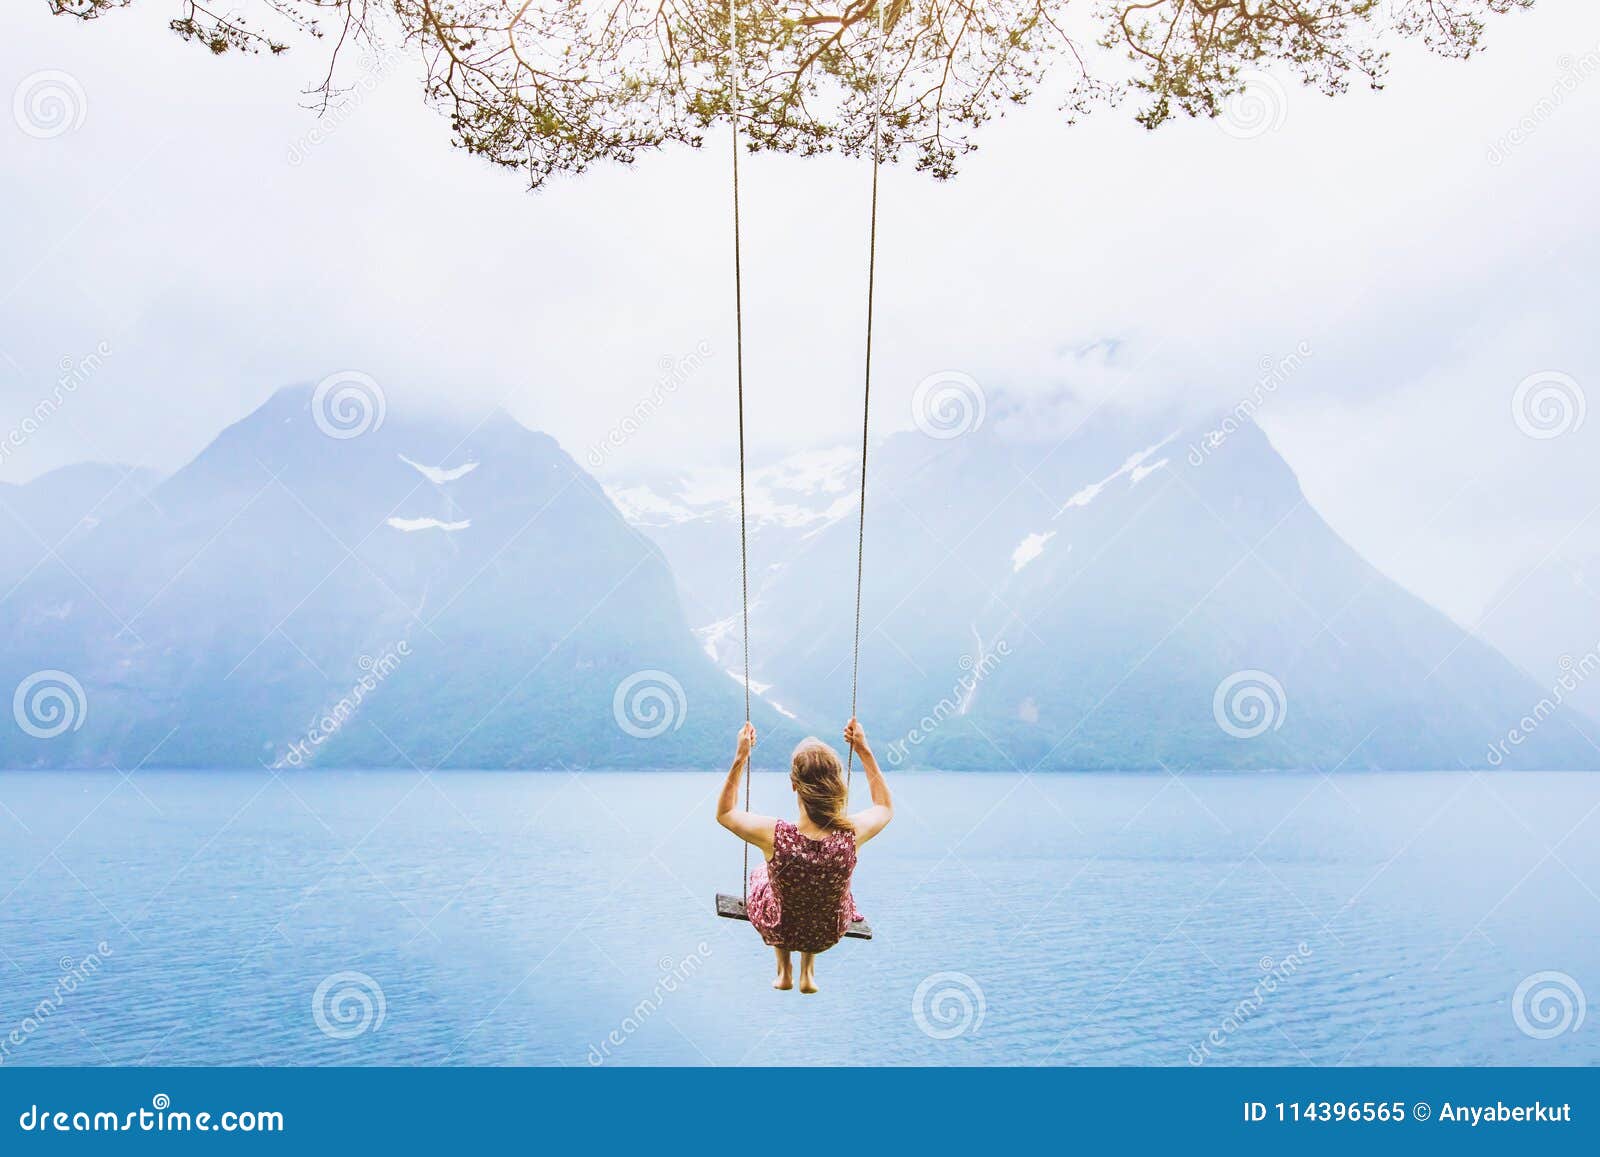 dream concept, beautiful young woman on the swing